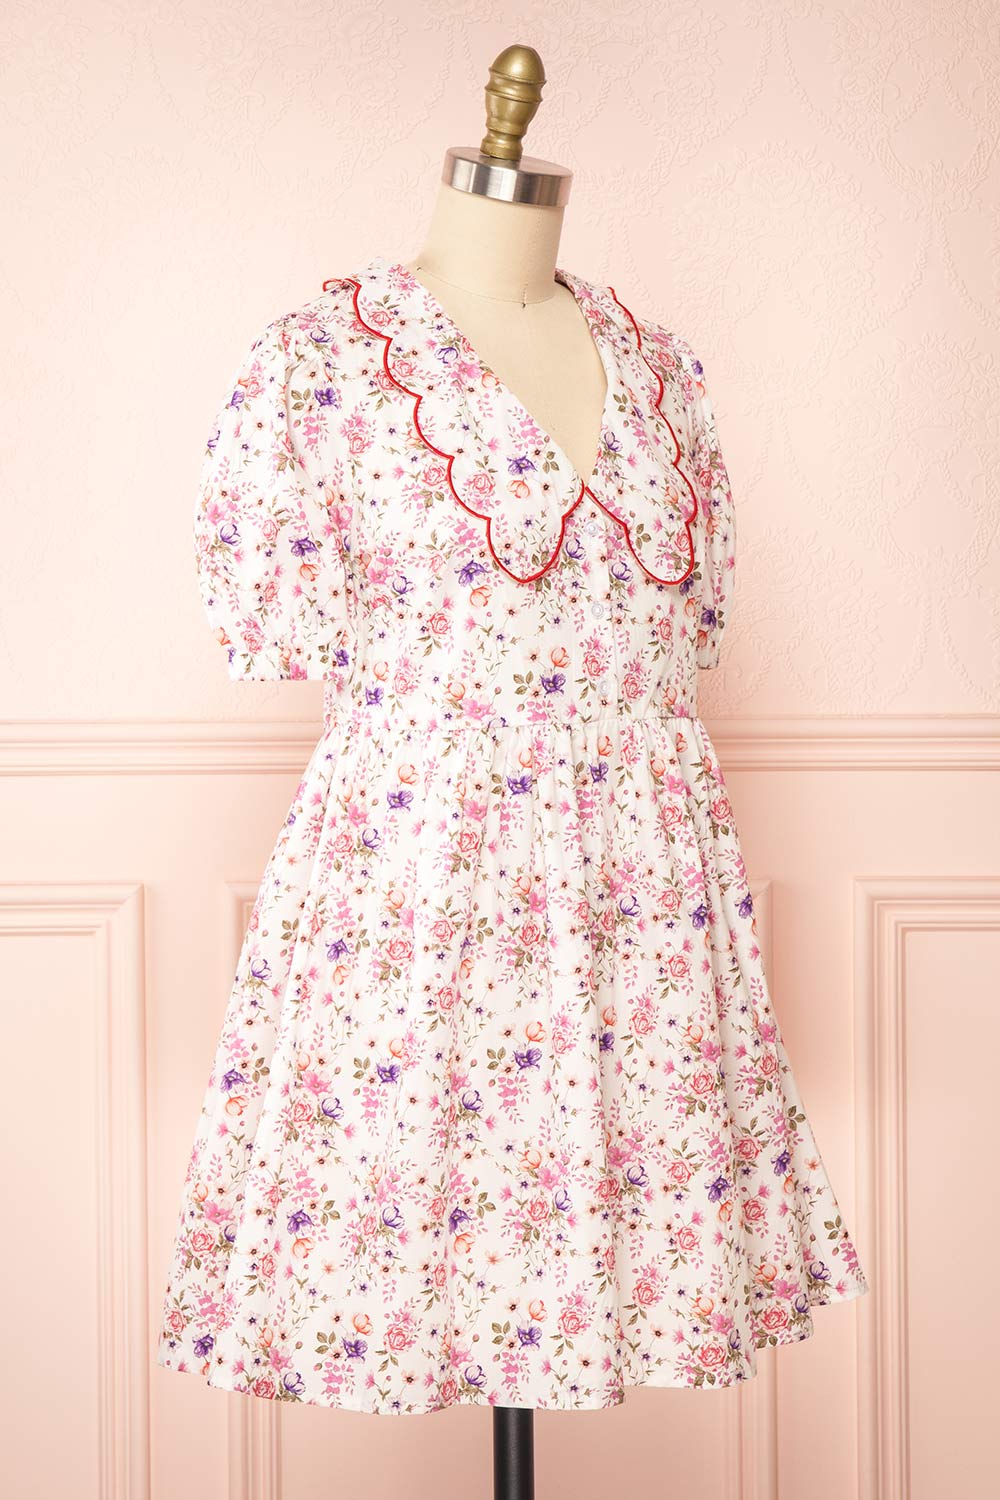 Crustalam Floral Babydoll Dress w/ Scalloped Collar | Boutique 1861 side view